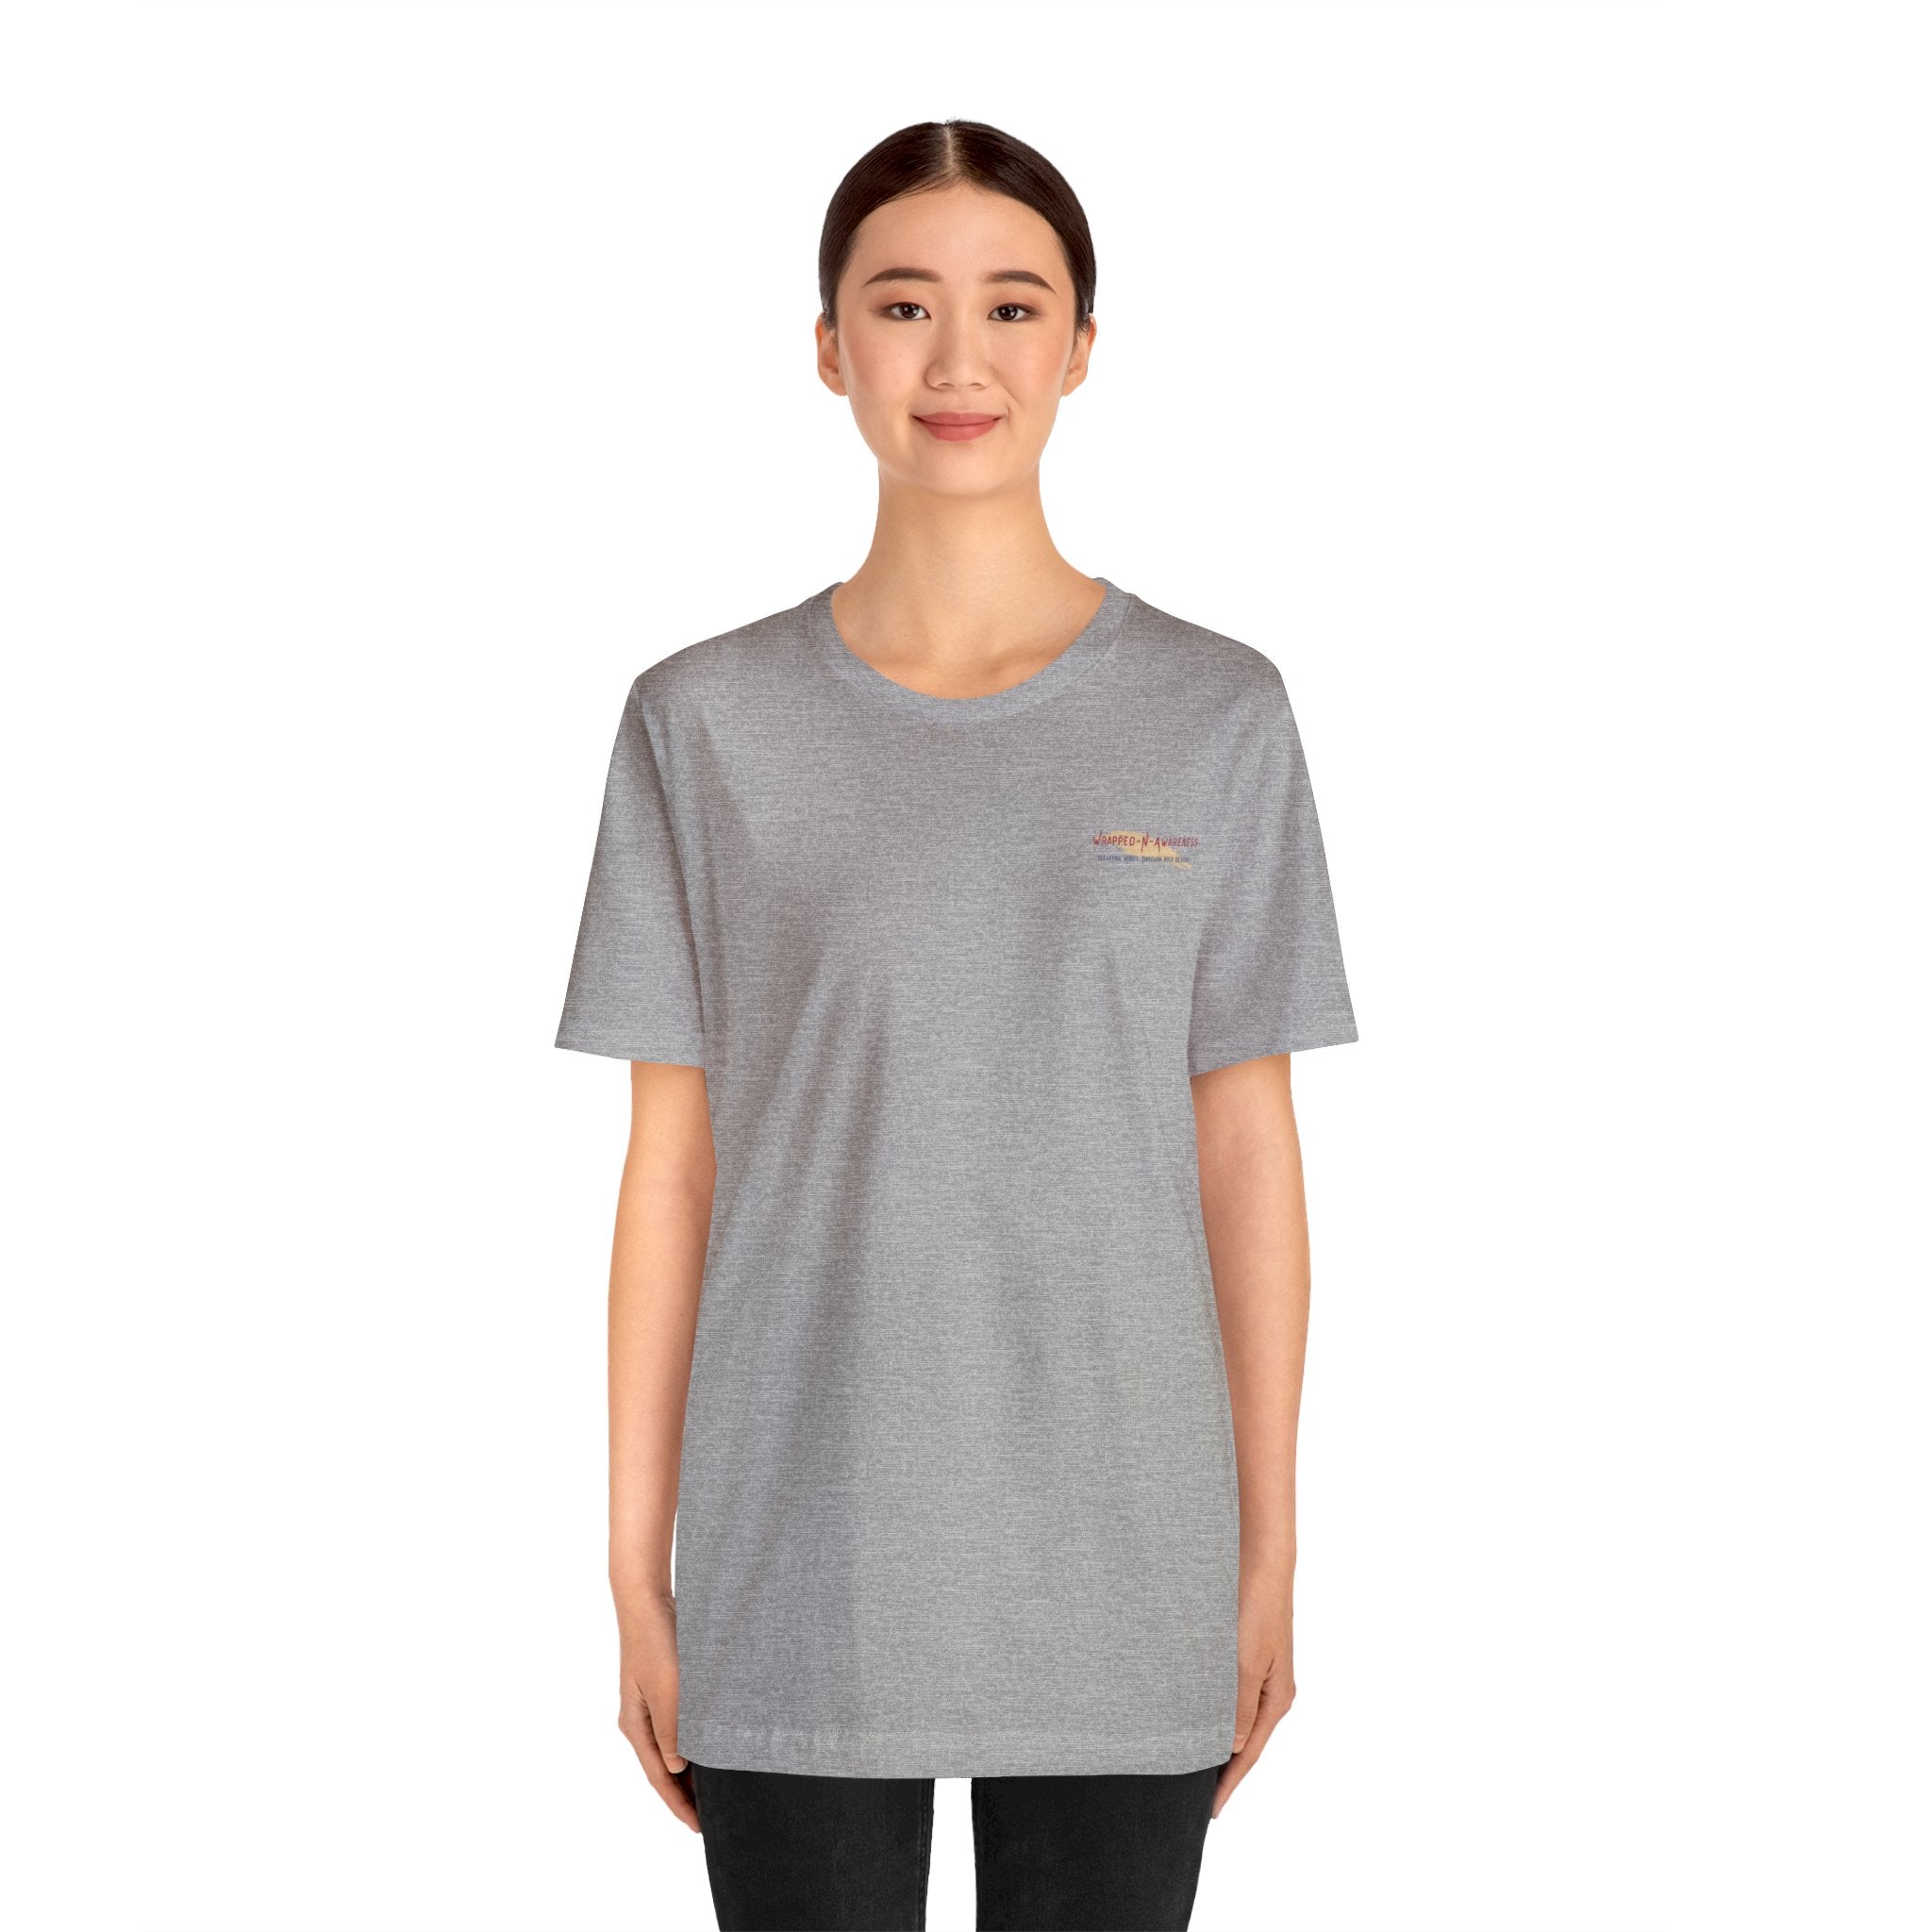 You Are Enough Short Sleeve Tee Bella+Canvas 3001 Heather Mauve Airlume Cotton Bella+Canvas 3001 Crew Neckline Jersey Short Sleeve Lightweight Fabric Mental Health Support Retail Fit Tear-away Label Tee Unisex Tee T-Shirt 4871124775579172961_2048 Printify